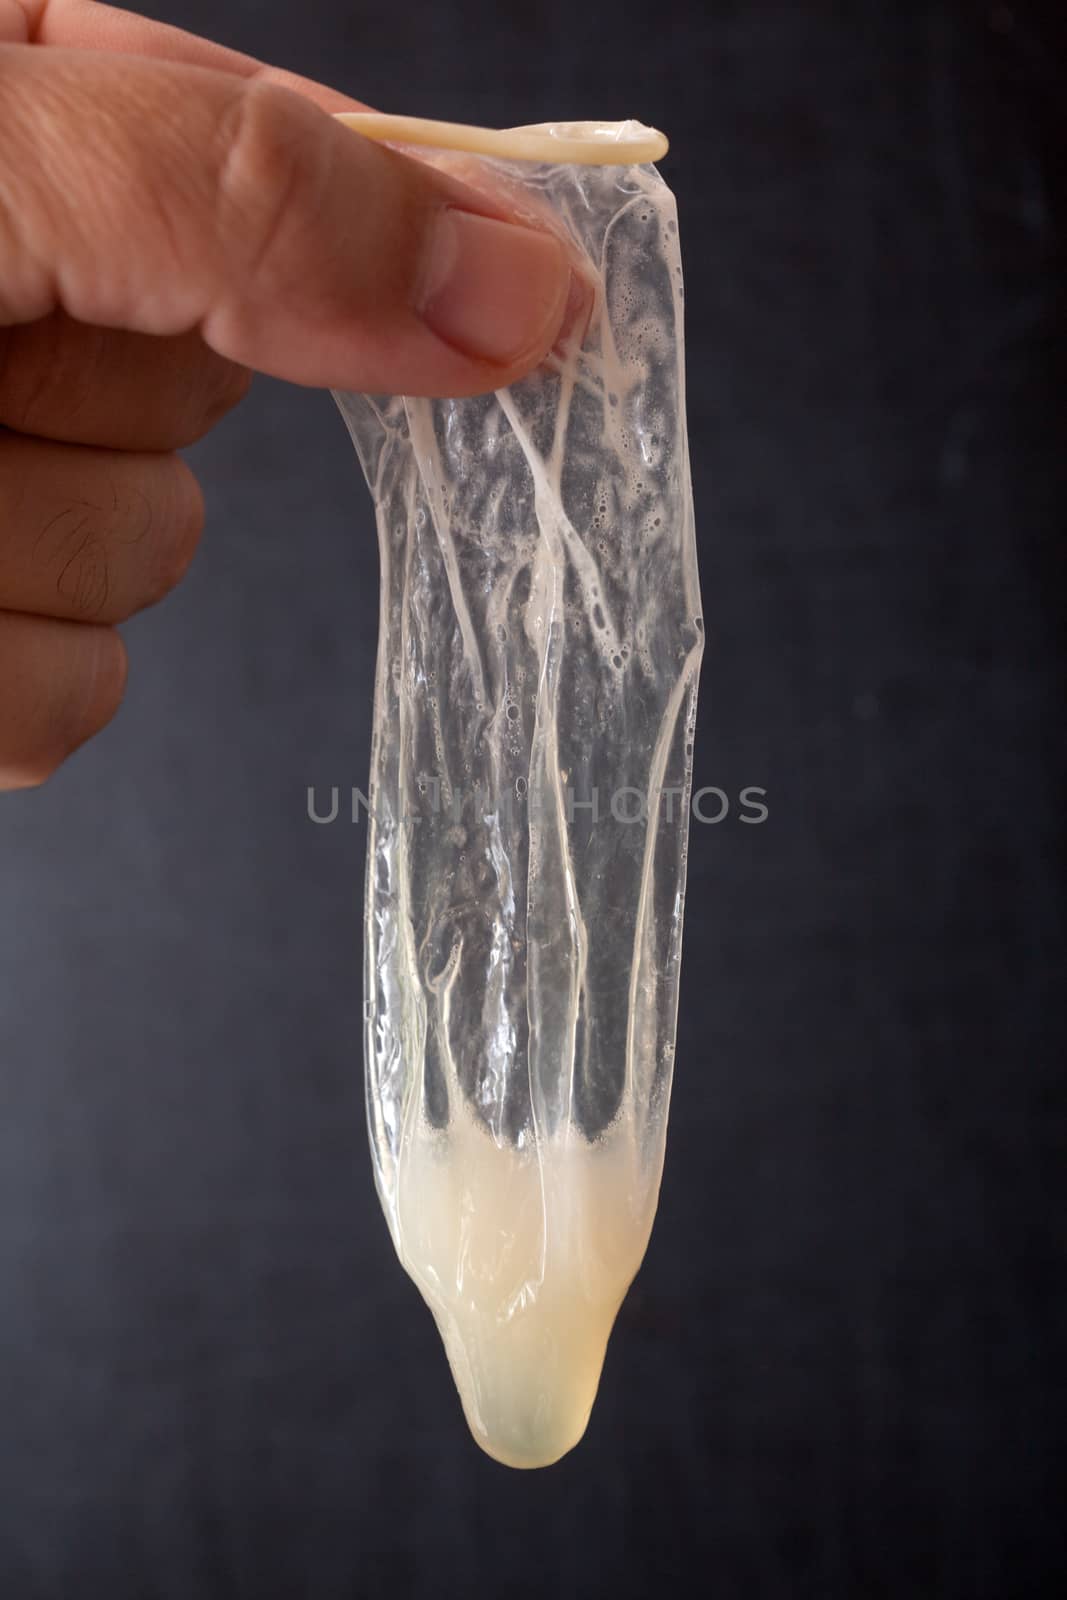 Hand with used condom isolated on black background